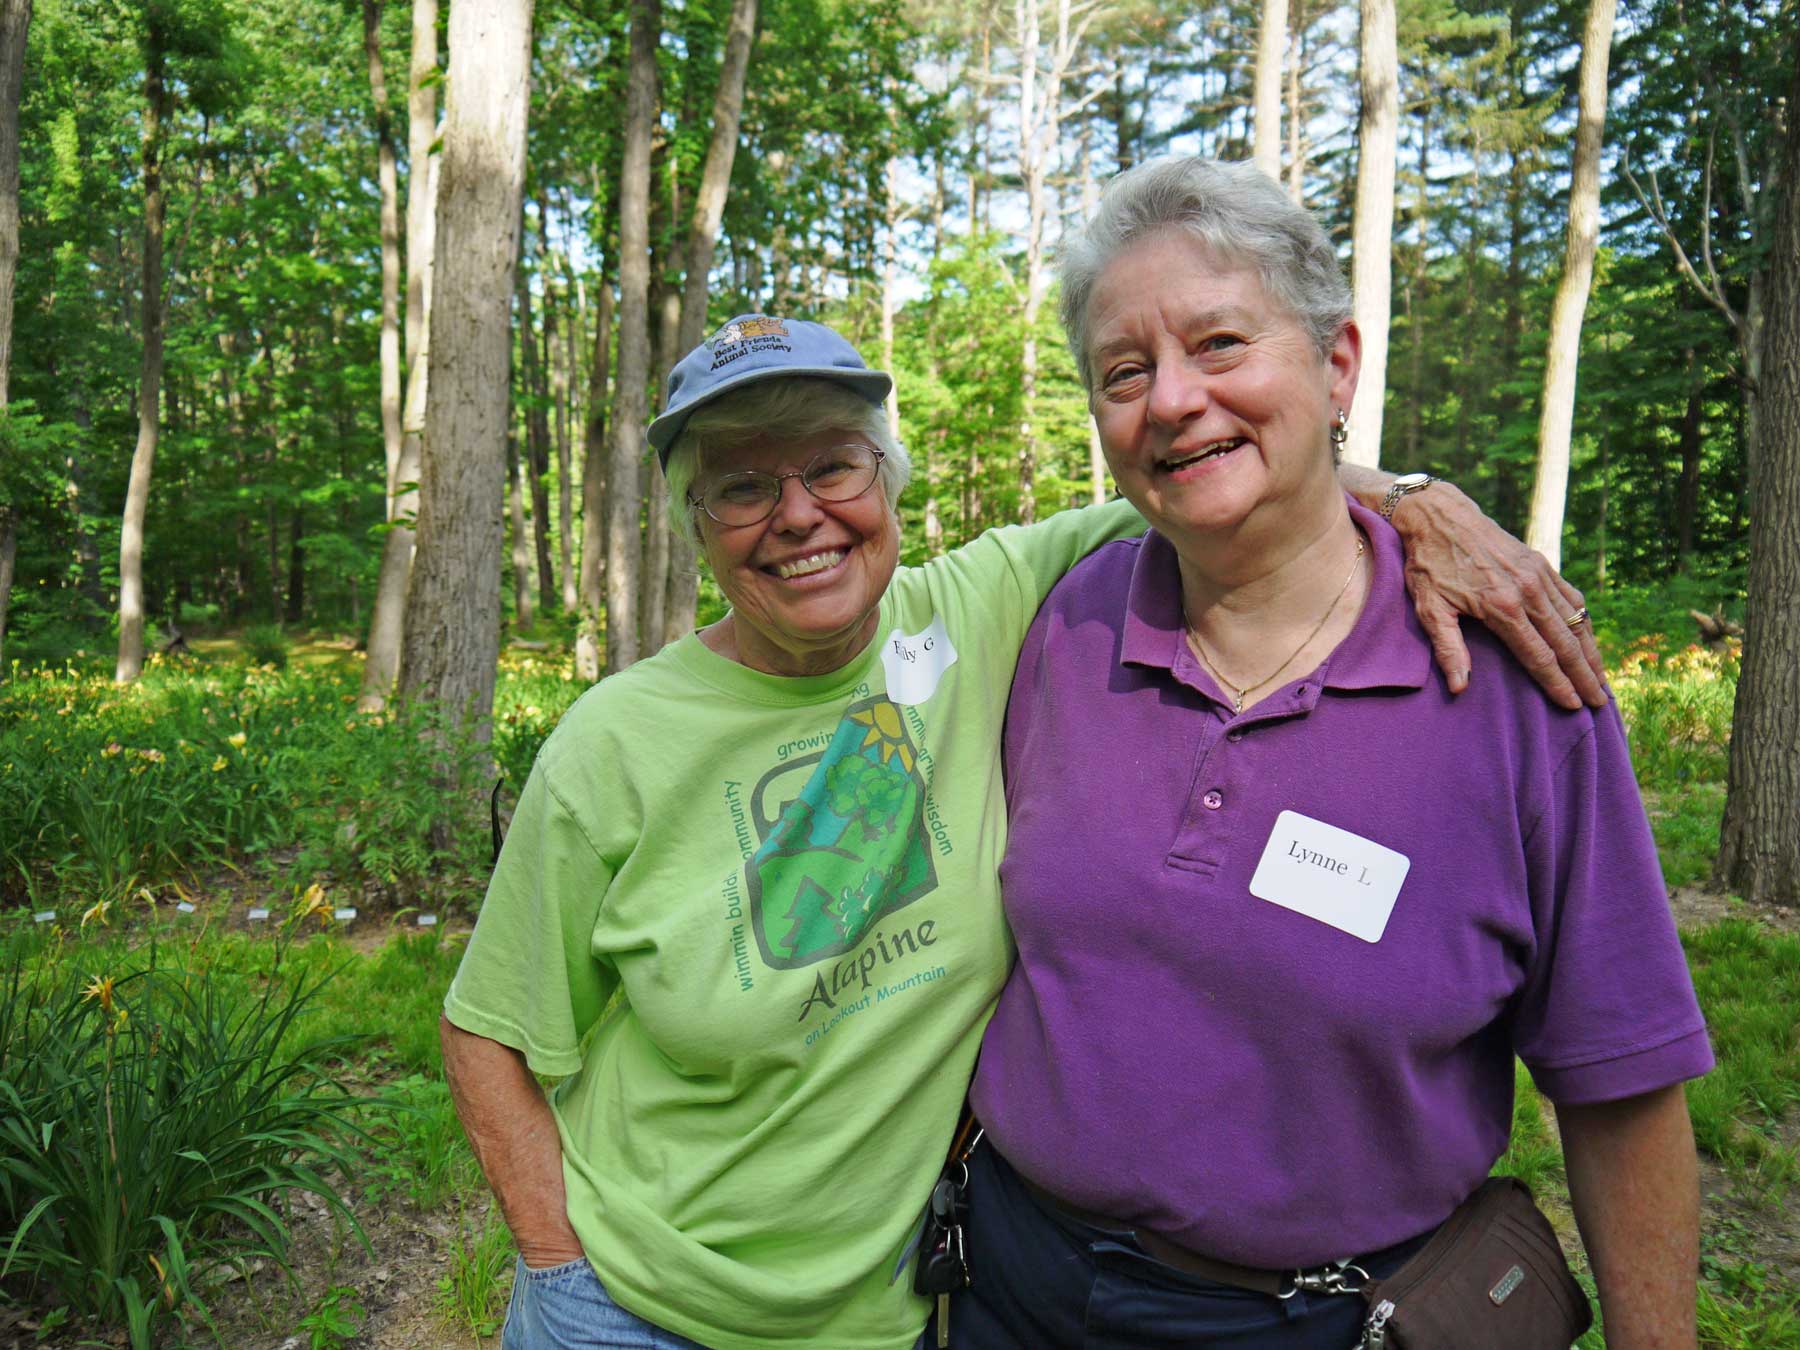 Two members of Rainbow Elders, smiling with their arms around each other outdoors